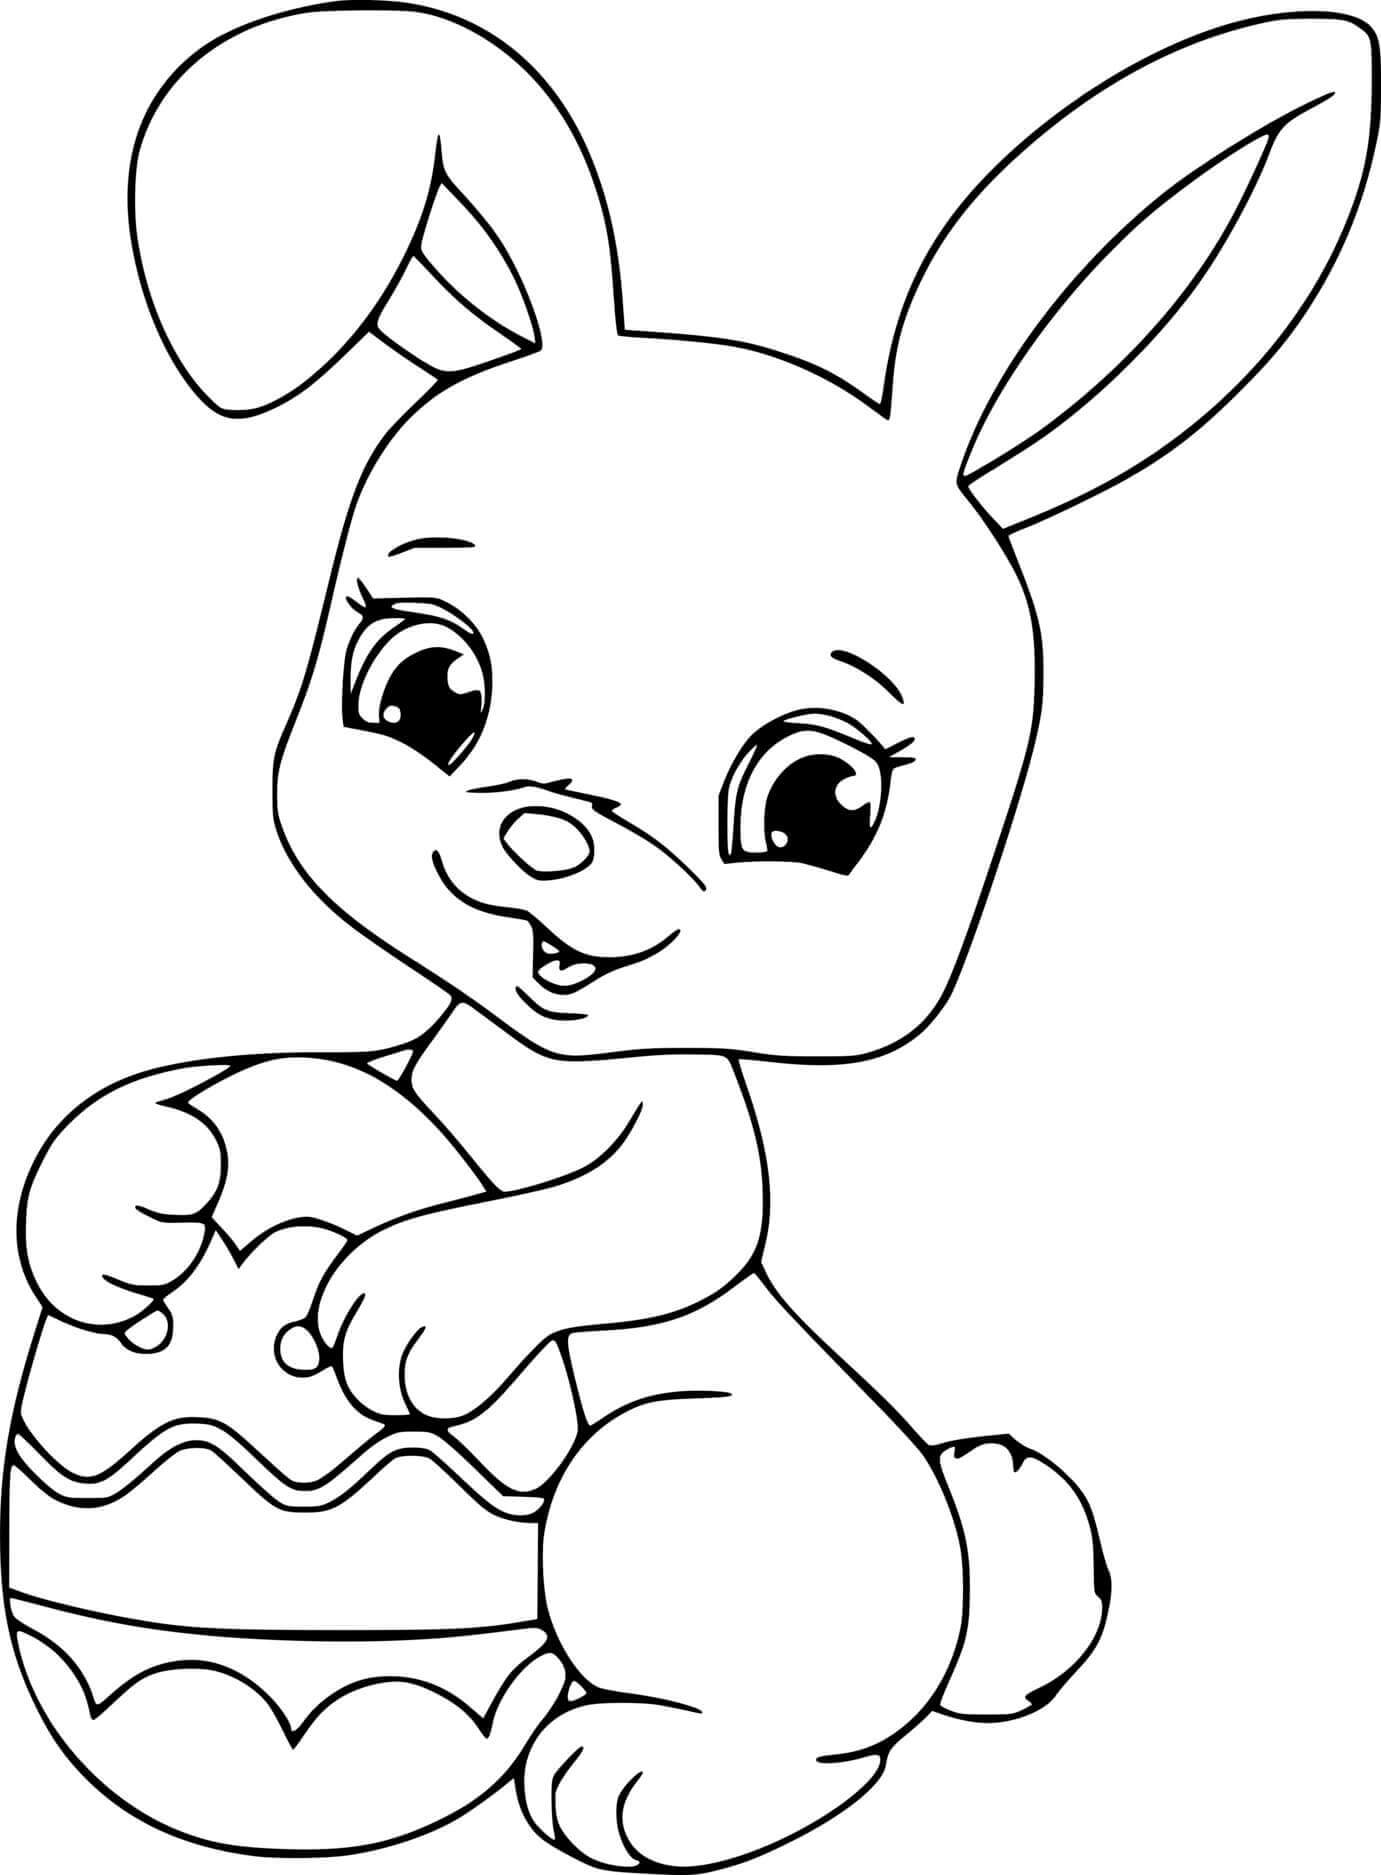 Cute Easter Bunny Holds An Egg Coloring Page